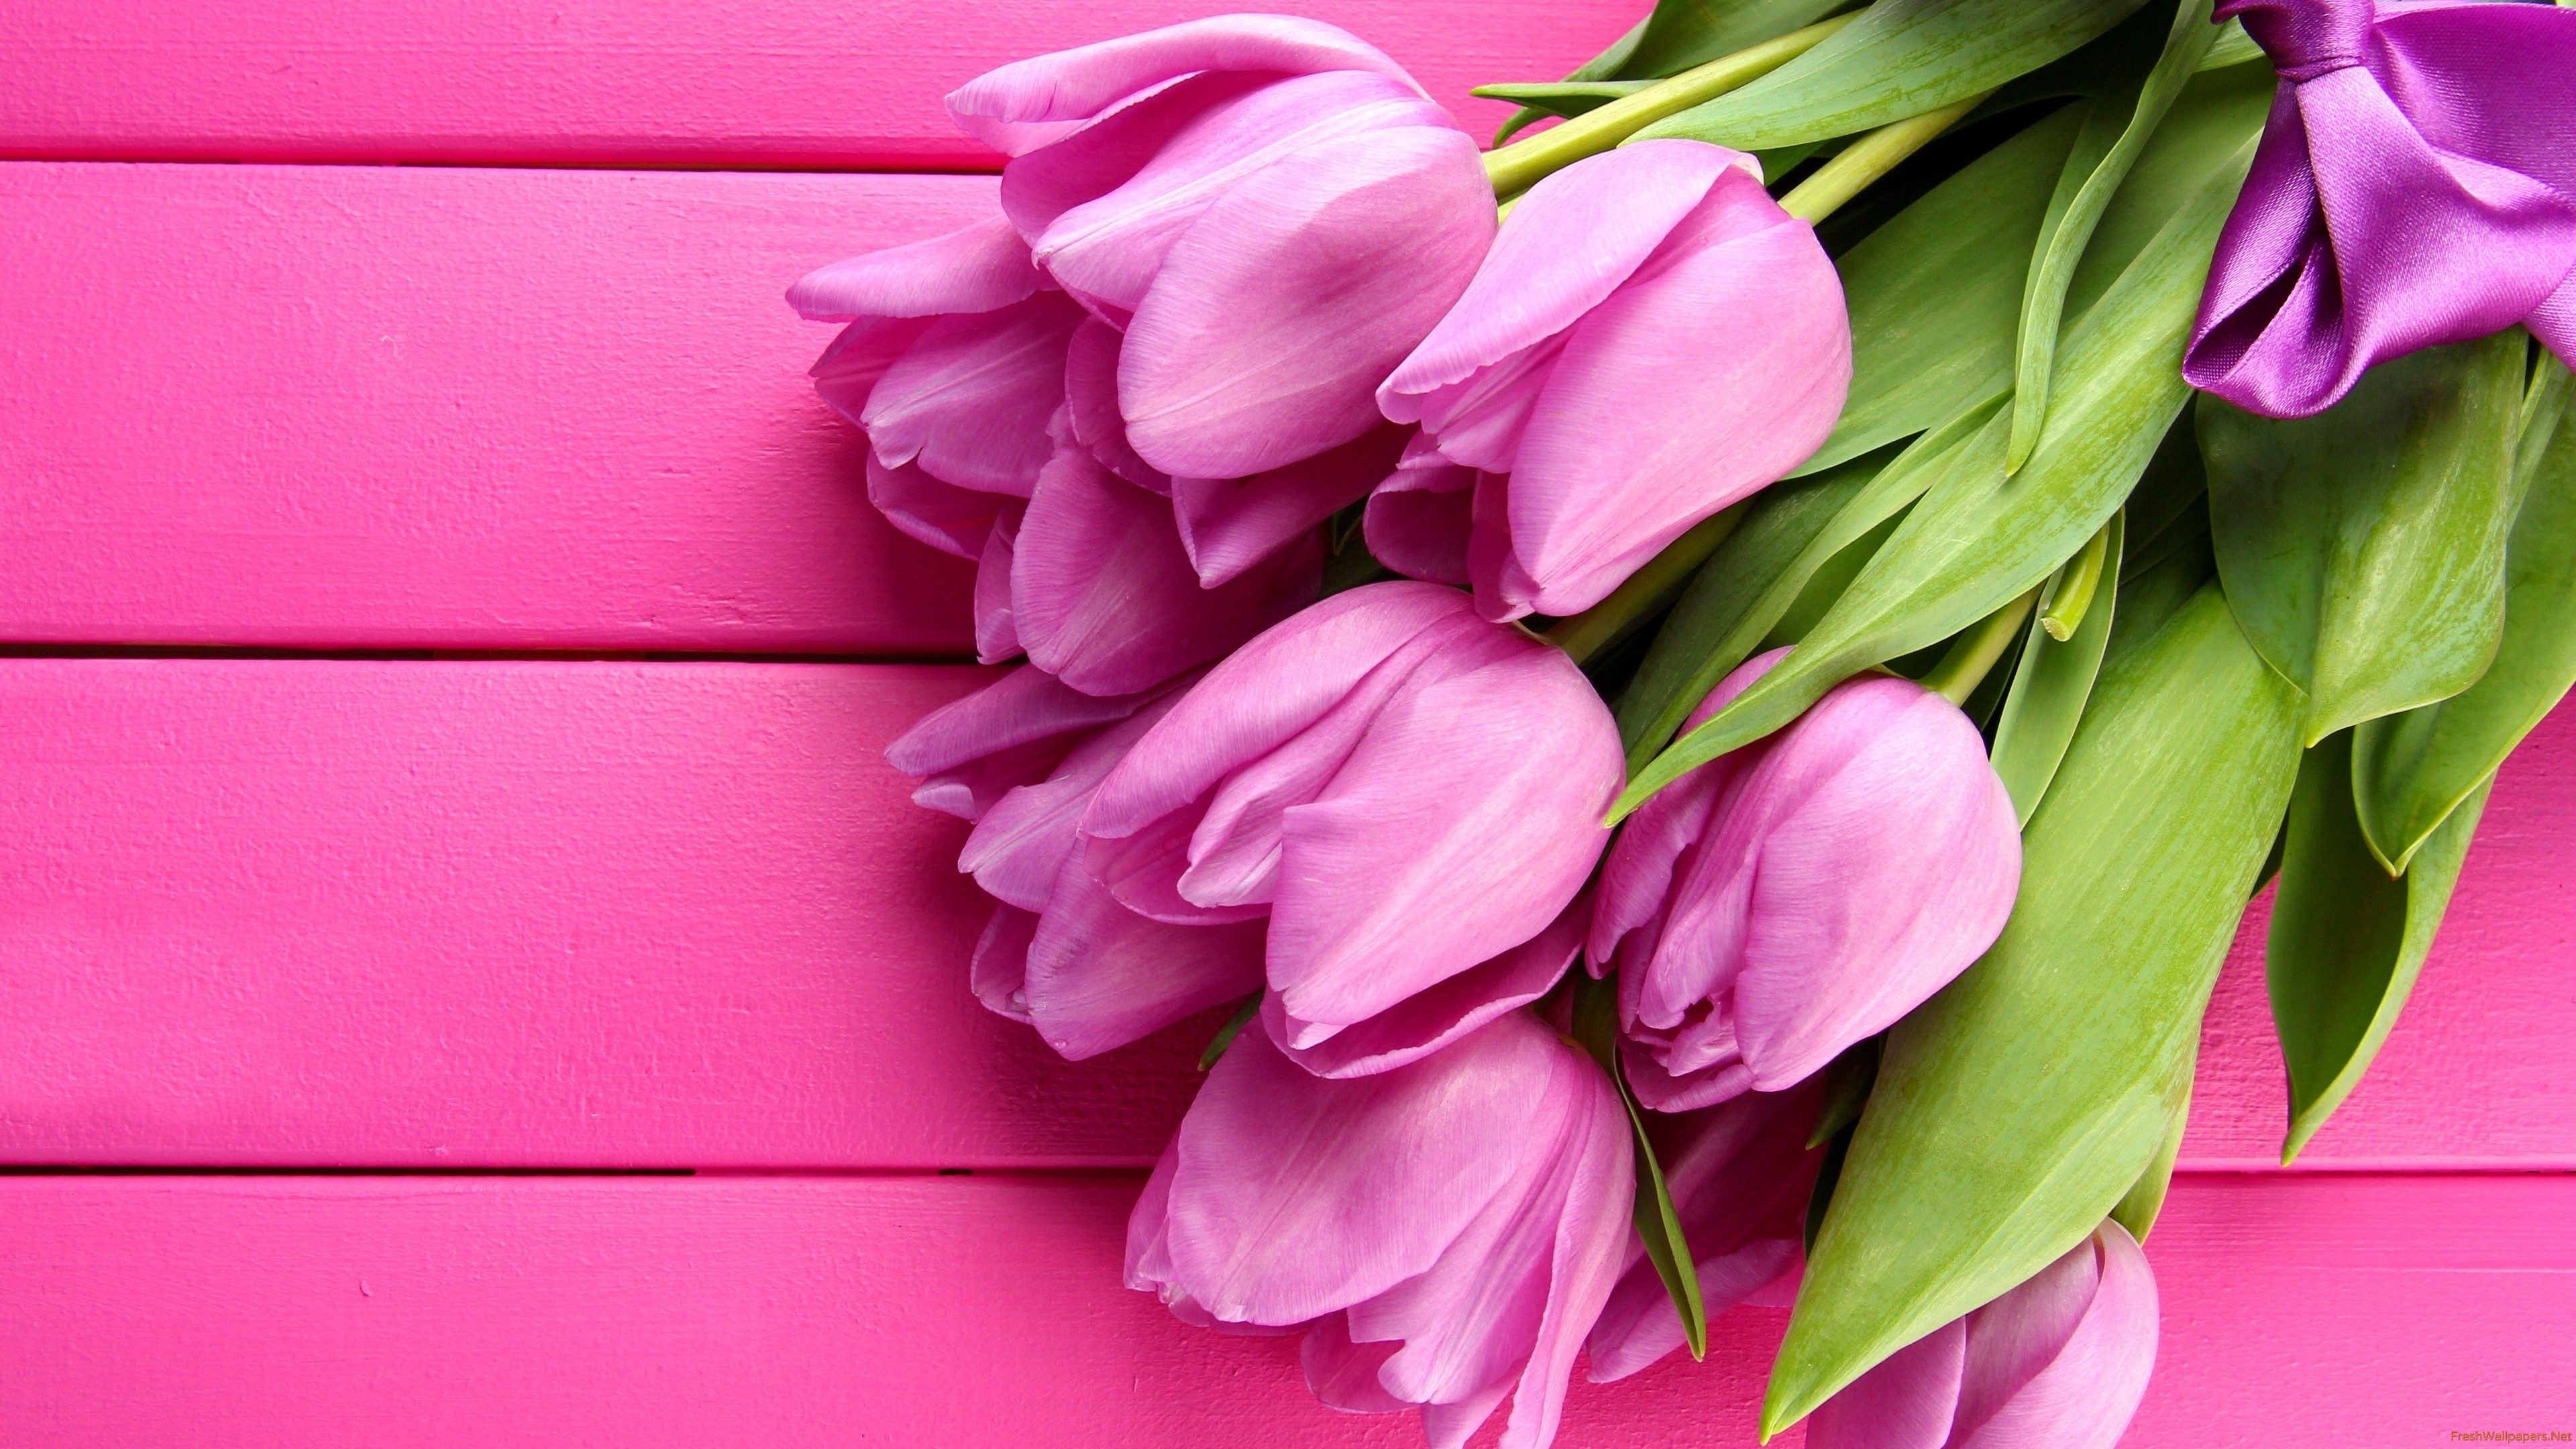 Gorgeous Pink Tulips wallpapers | Freshwallpapers